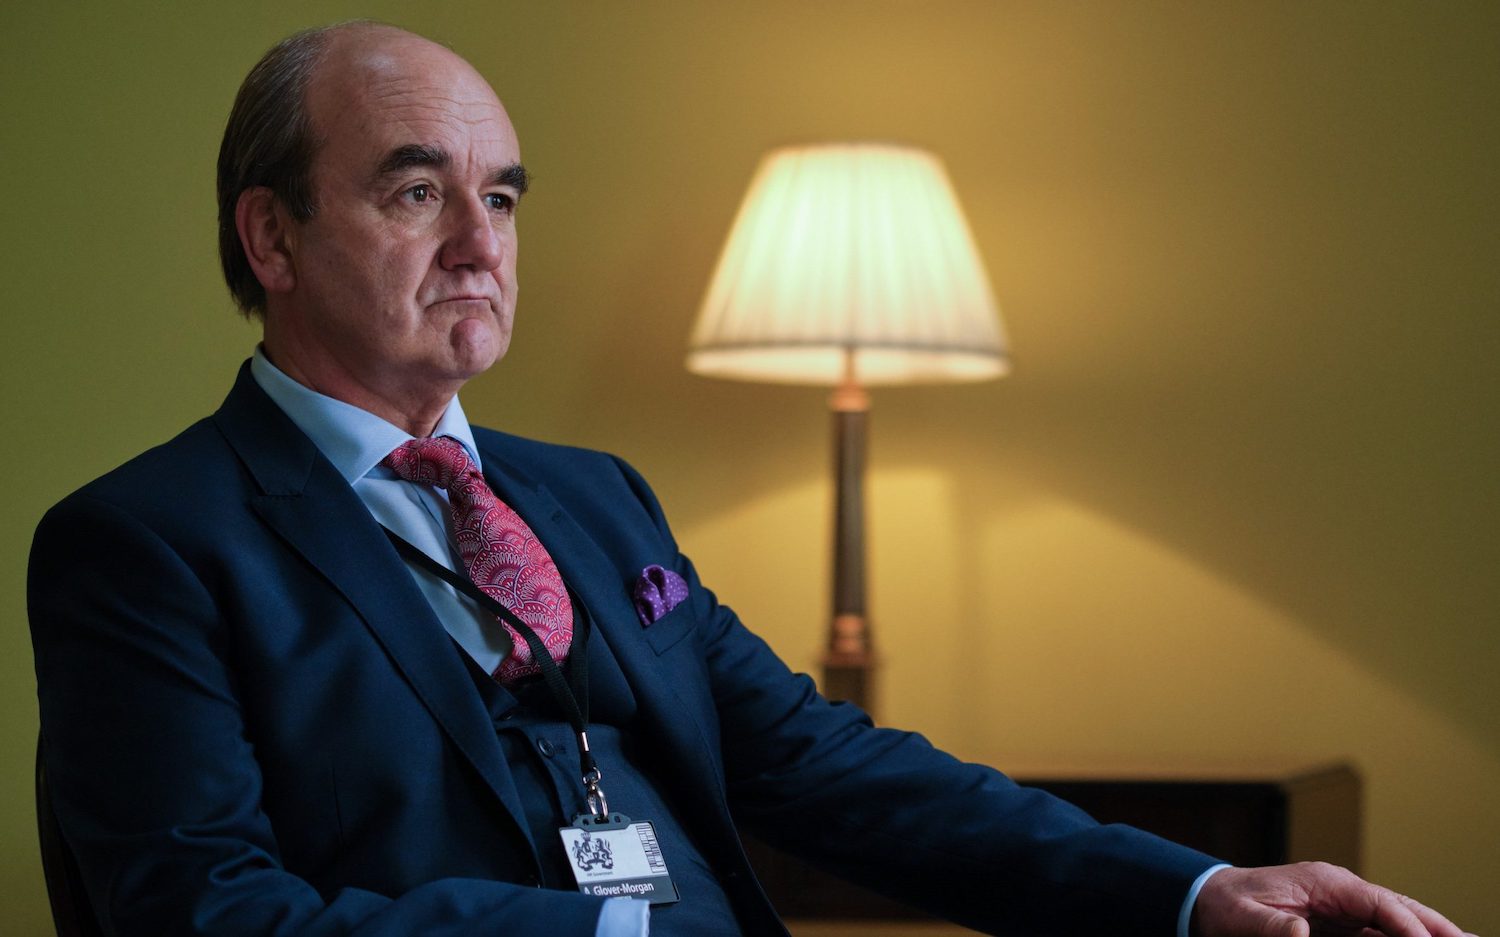 Archie Glover-Morgan (David Haig). Credit: Courtesy of © 2021 New Pictures Ltd